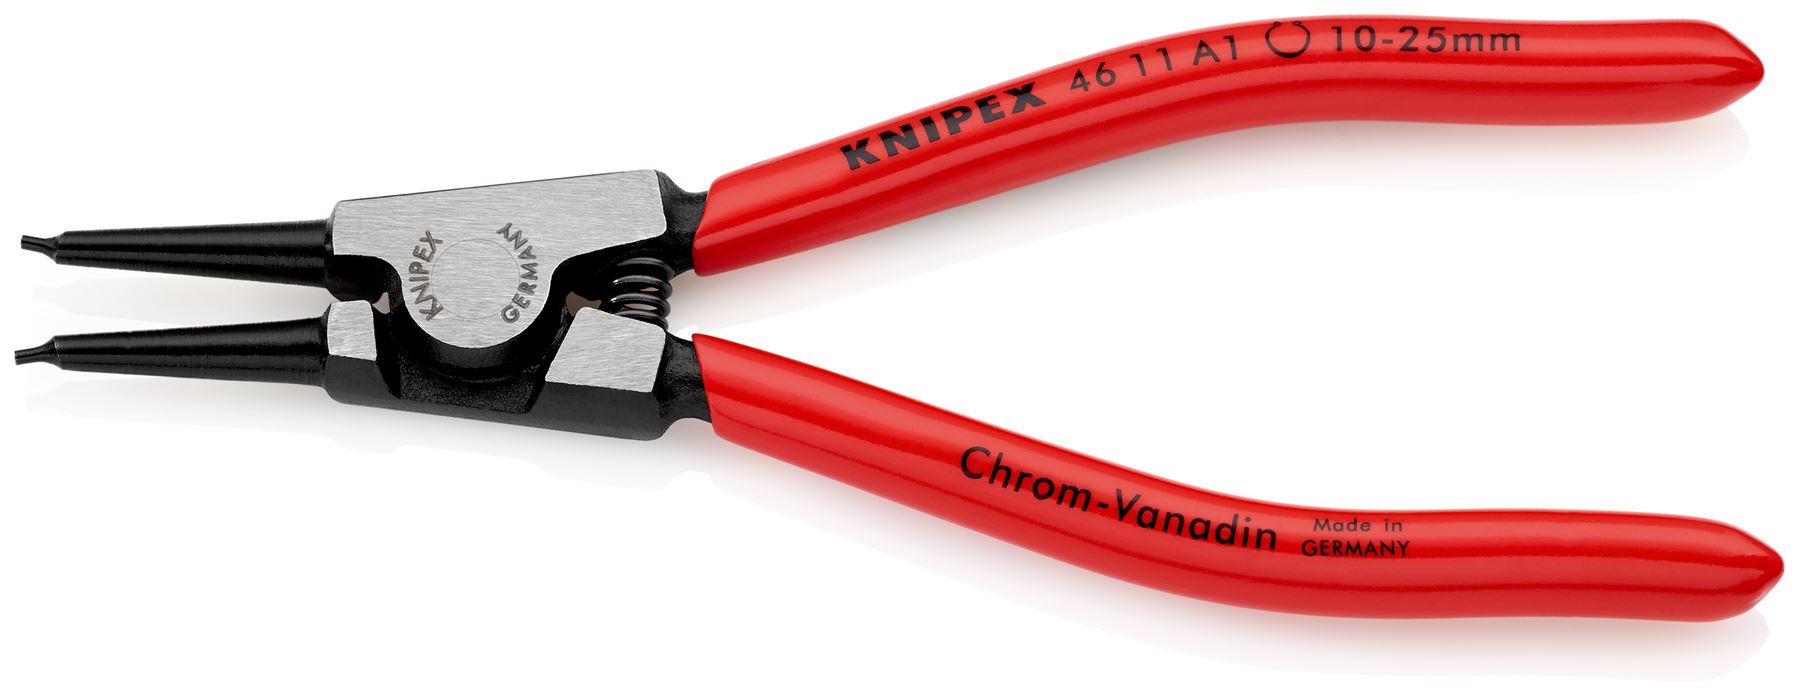 KNIPEX Circlip Pliers for External Circlips on Shafts 140mm 1.3mm Diameter Tips 46 11 A1